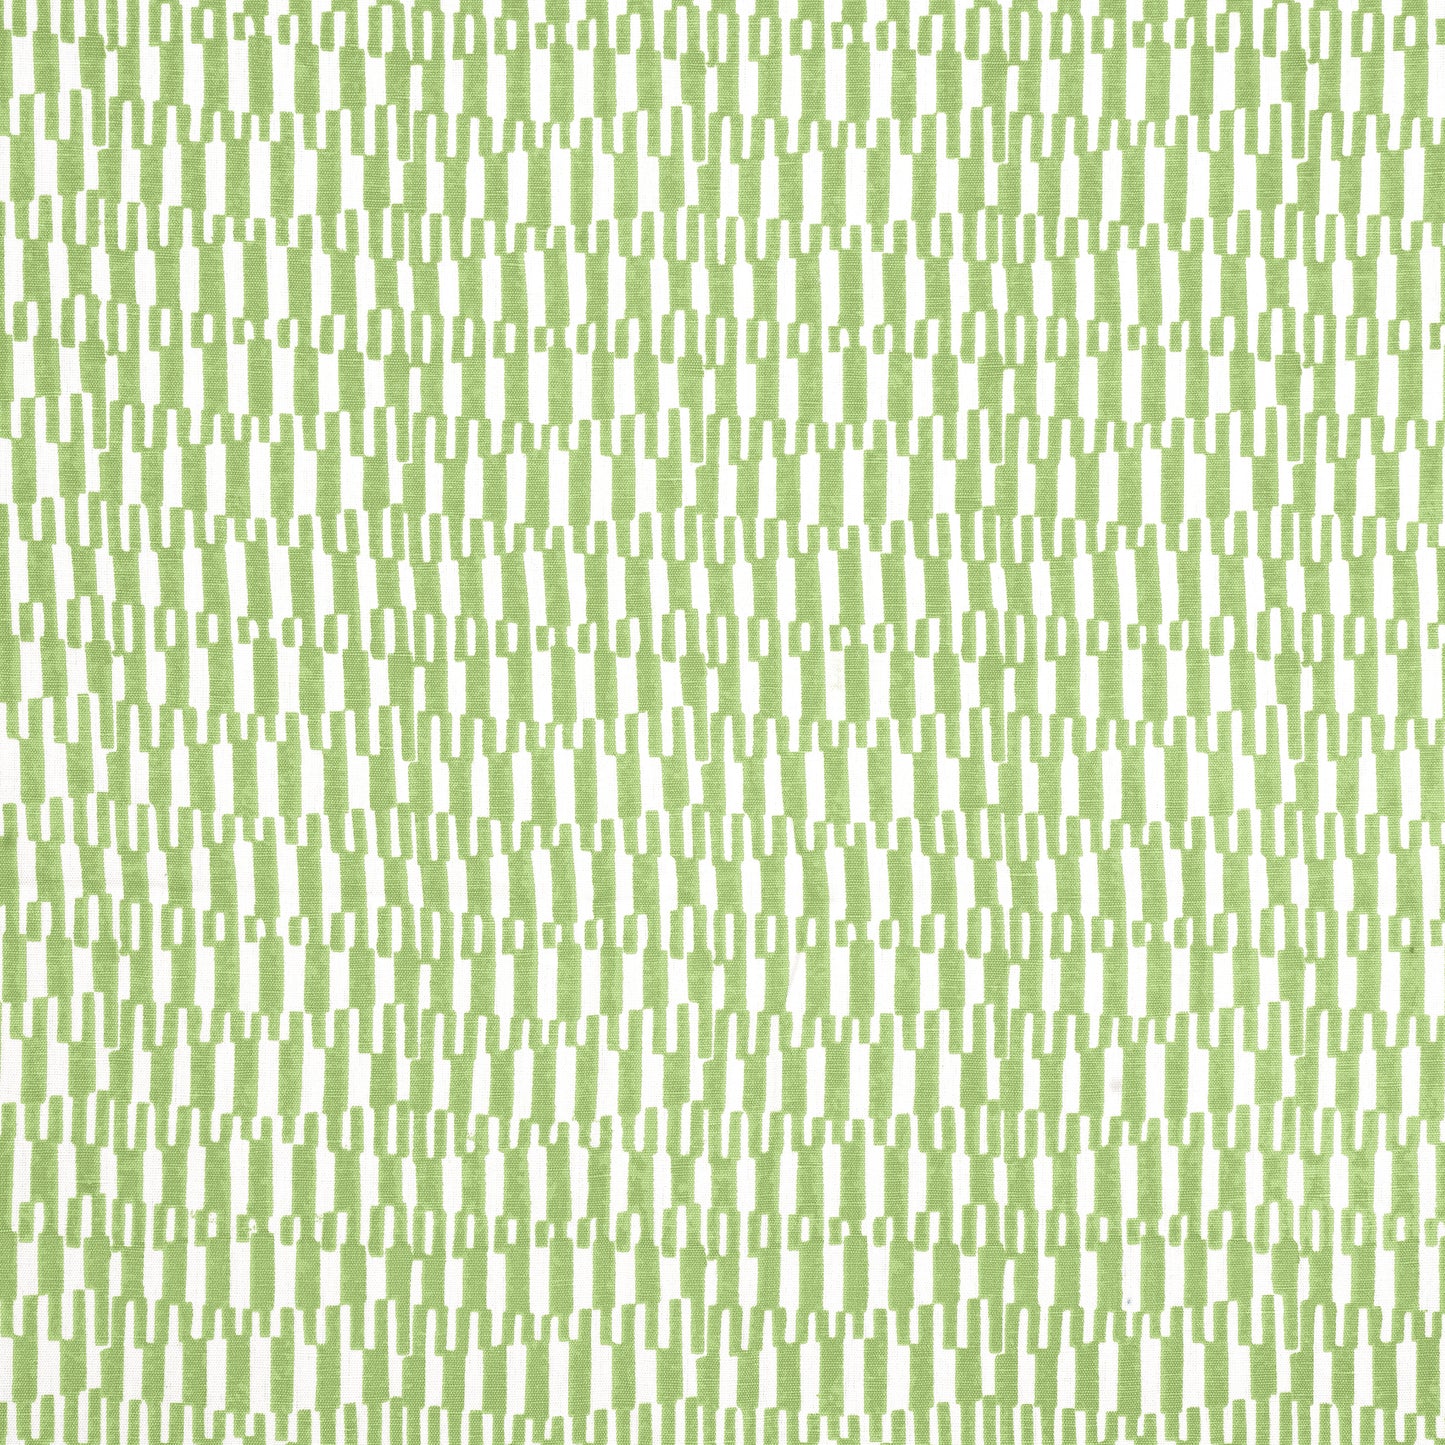 Purchase Thibaut Fabric SKU# F920800 pattern name Gogo color Parrot Green